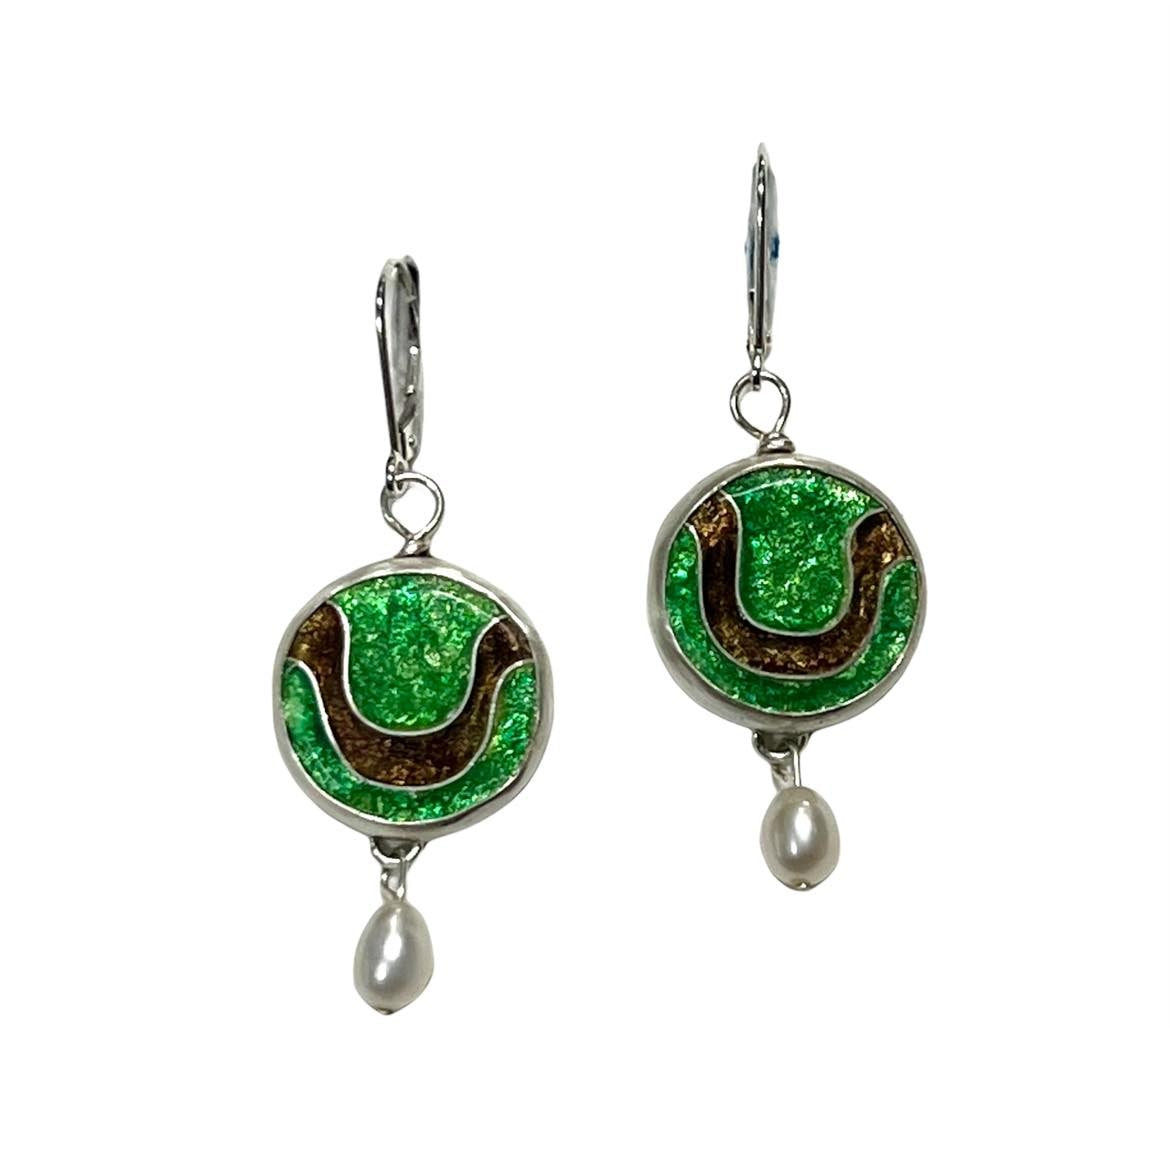 Vitrice McMurry Sterling "Crescent City" Cloisonne Earrings with Pearls